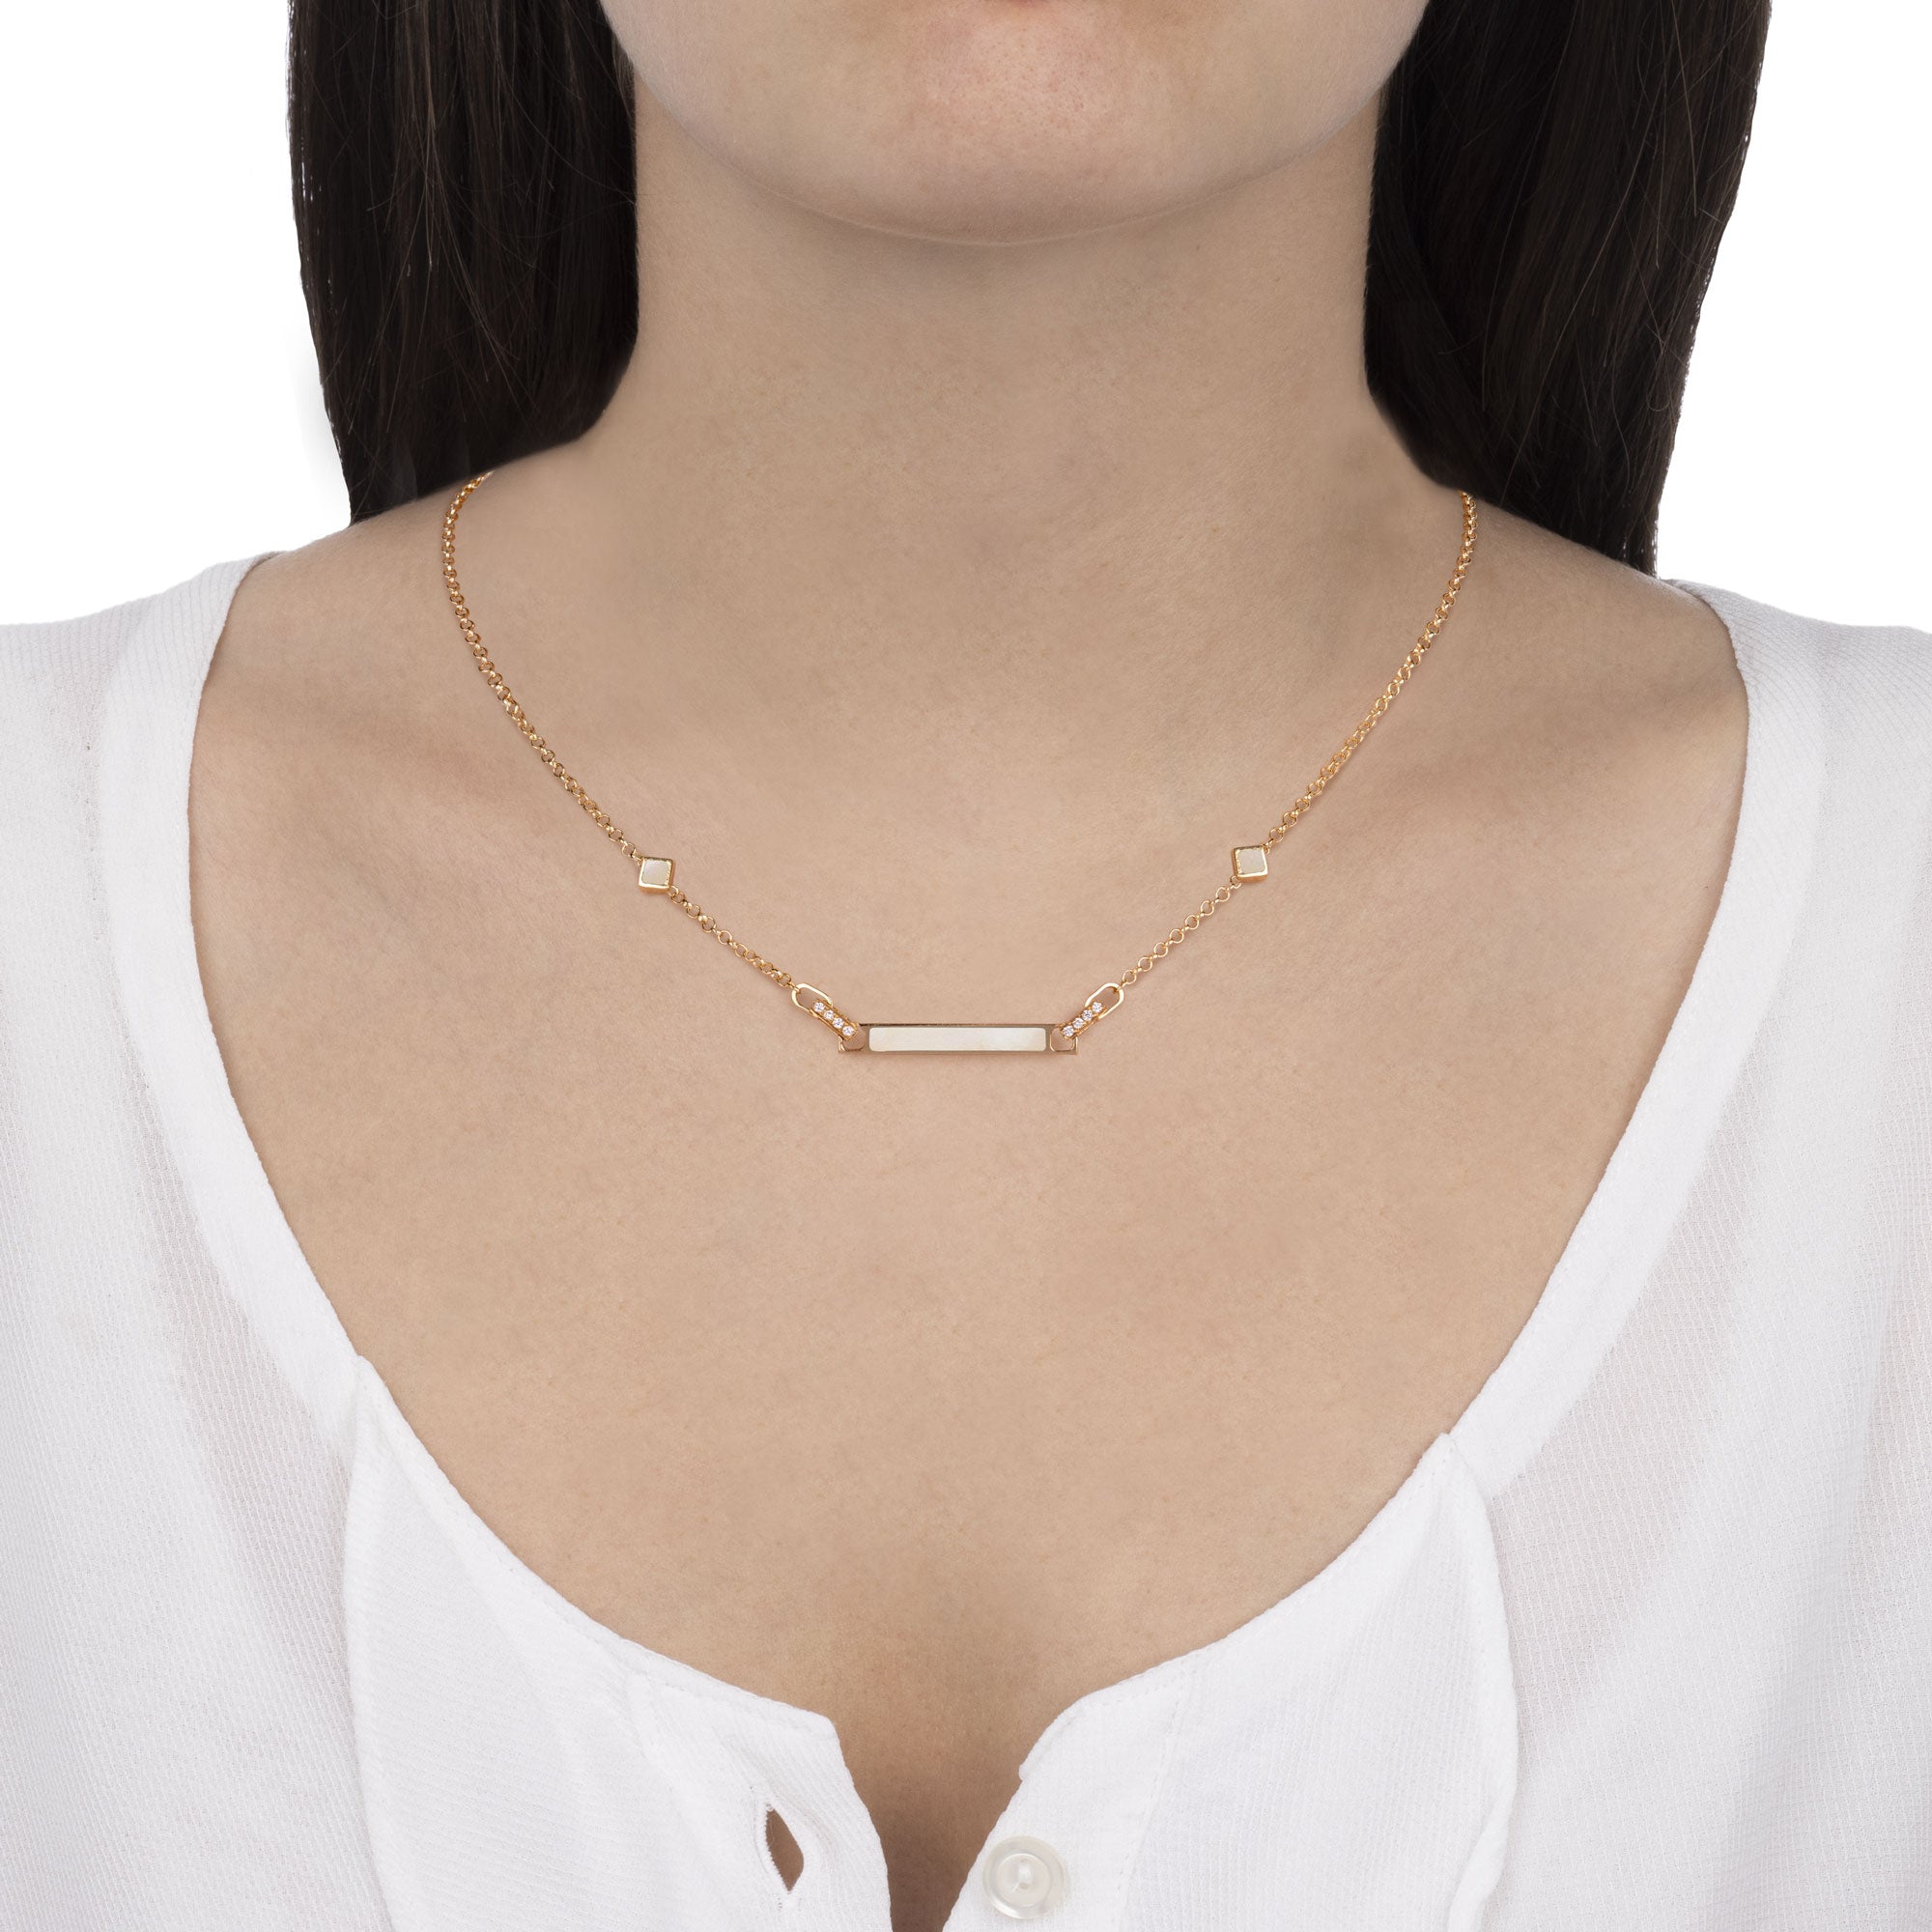 Unica Necklace Mother of Pearl and Diamonds